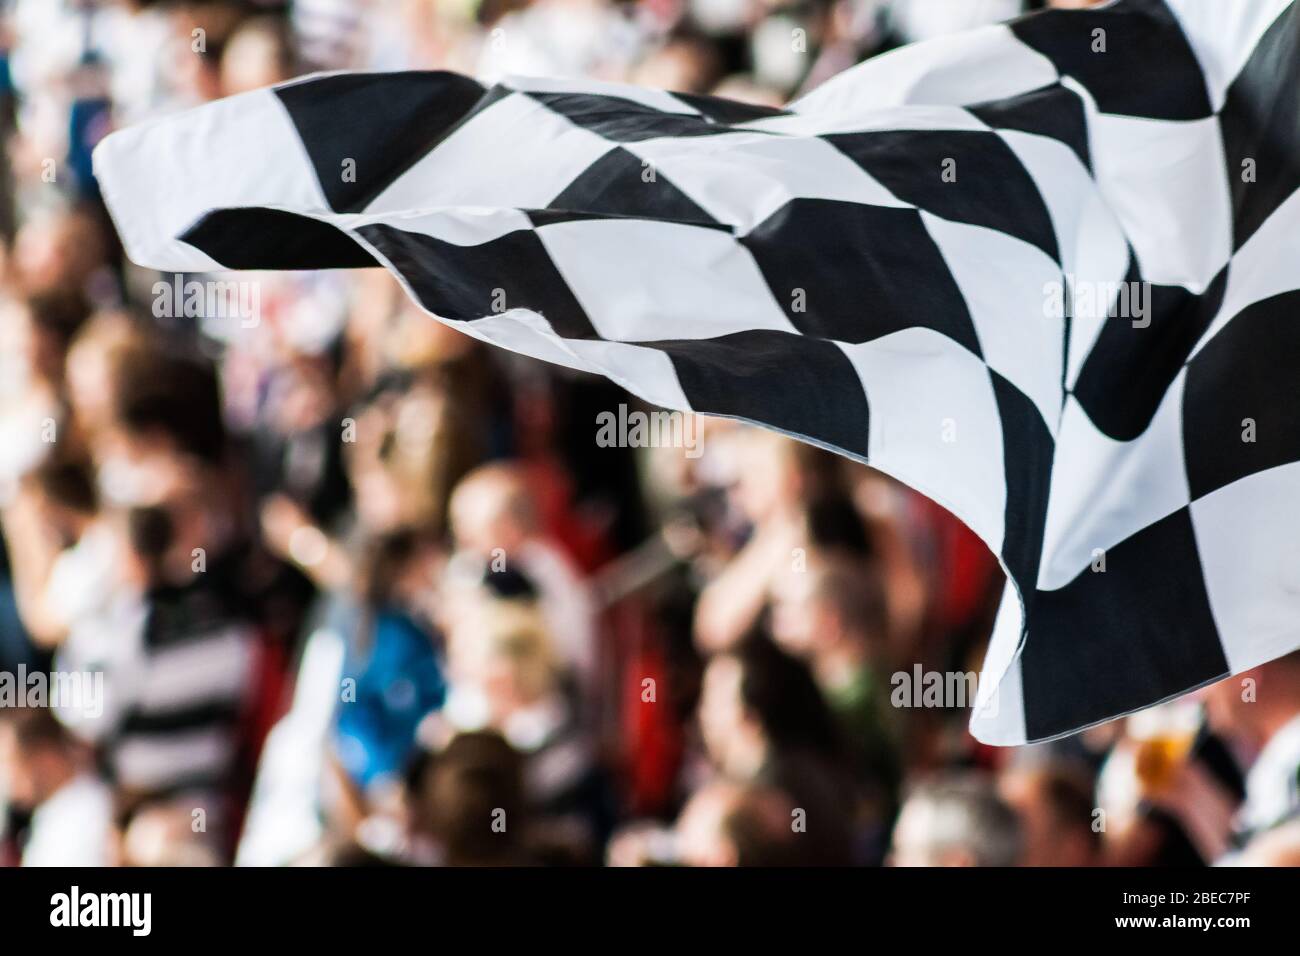 Black And White Checkered Flag. Black And White Checkered Flag. Starter's black and white checkered flag used by Hull FC rugby league fans at Wembley Stock Photo